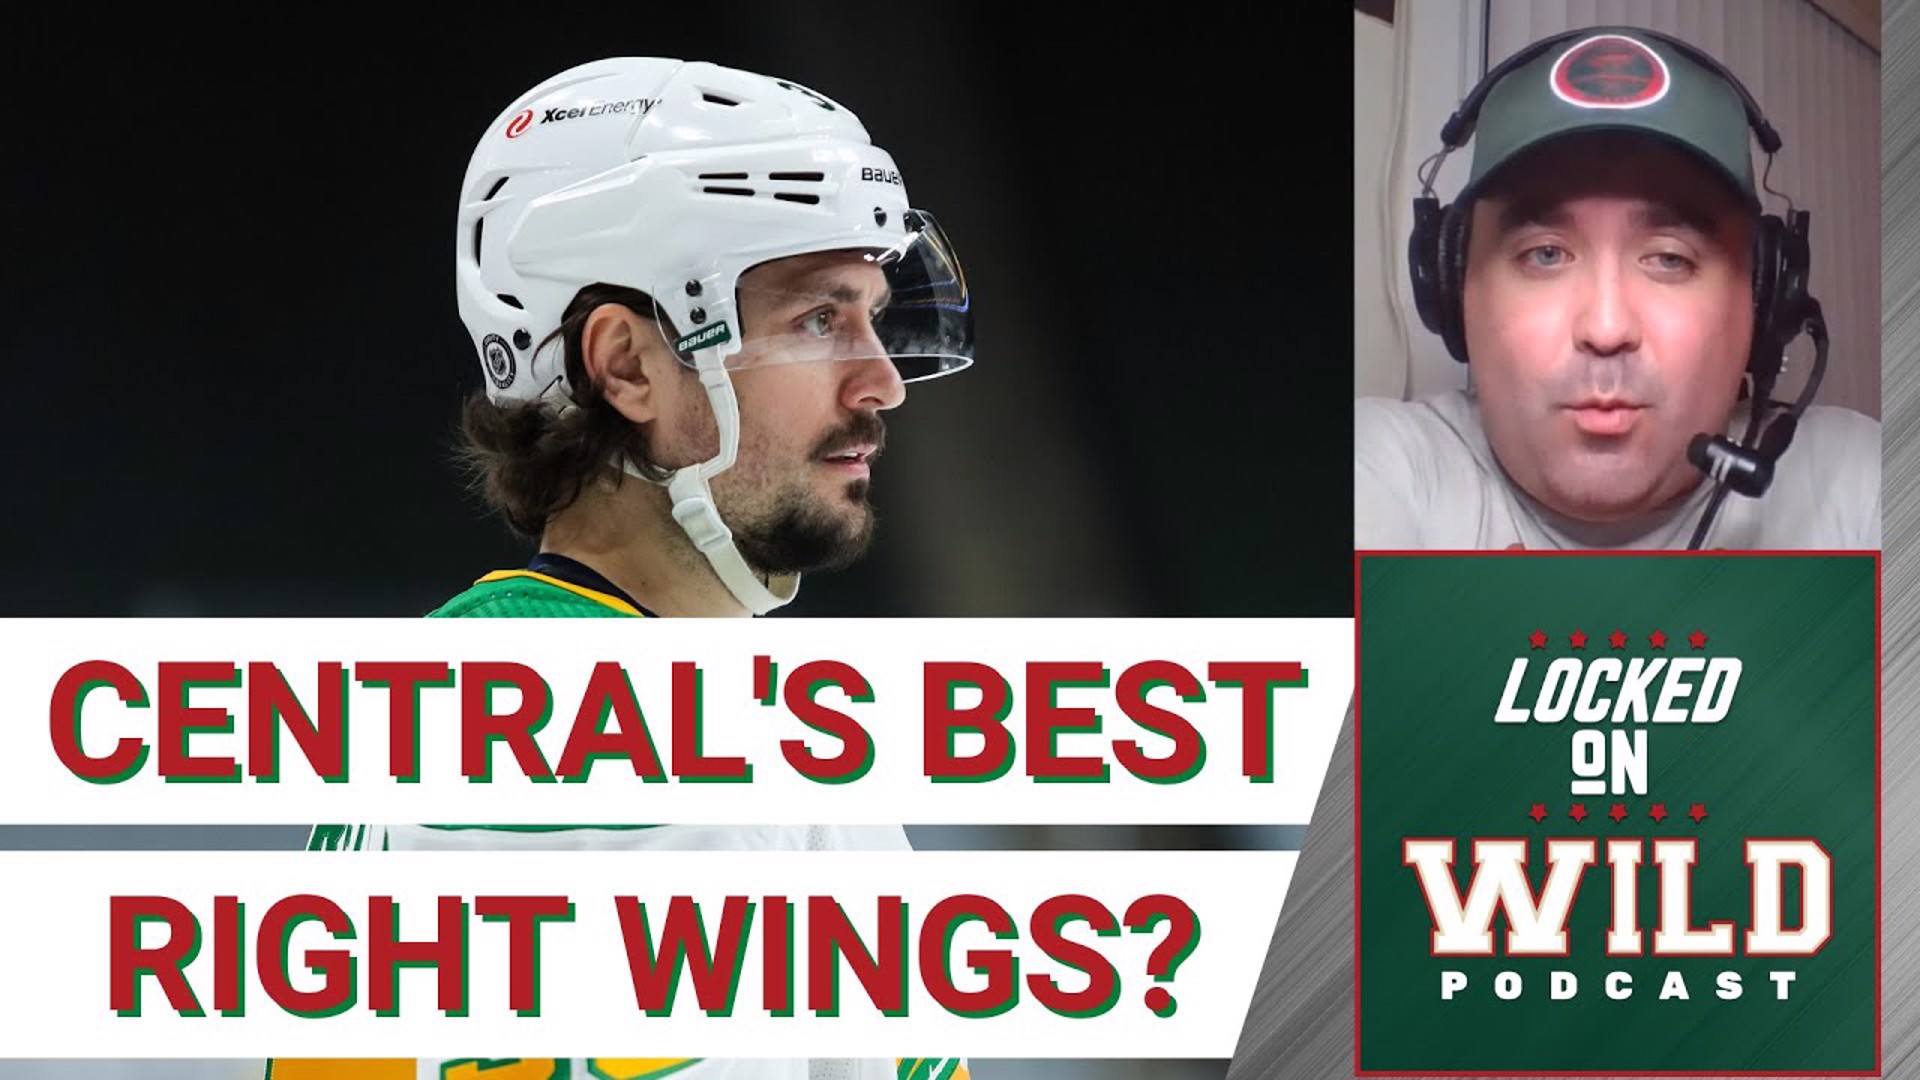 Where do Minnesota Wild Right Wings rank in the Central Division?